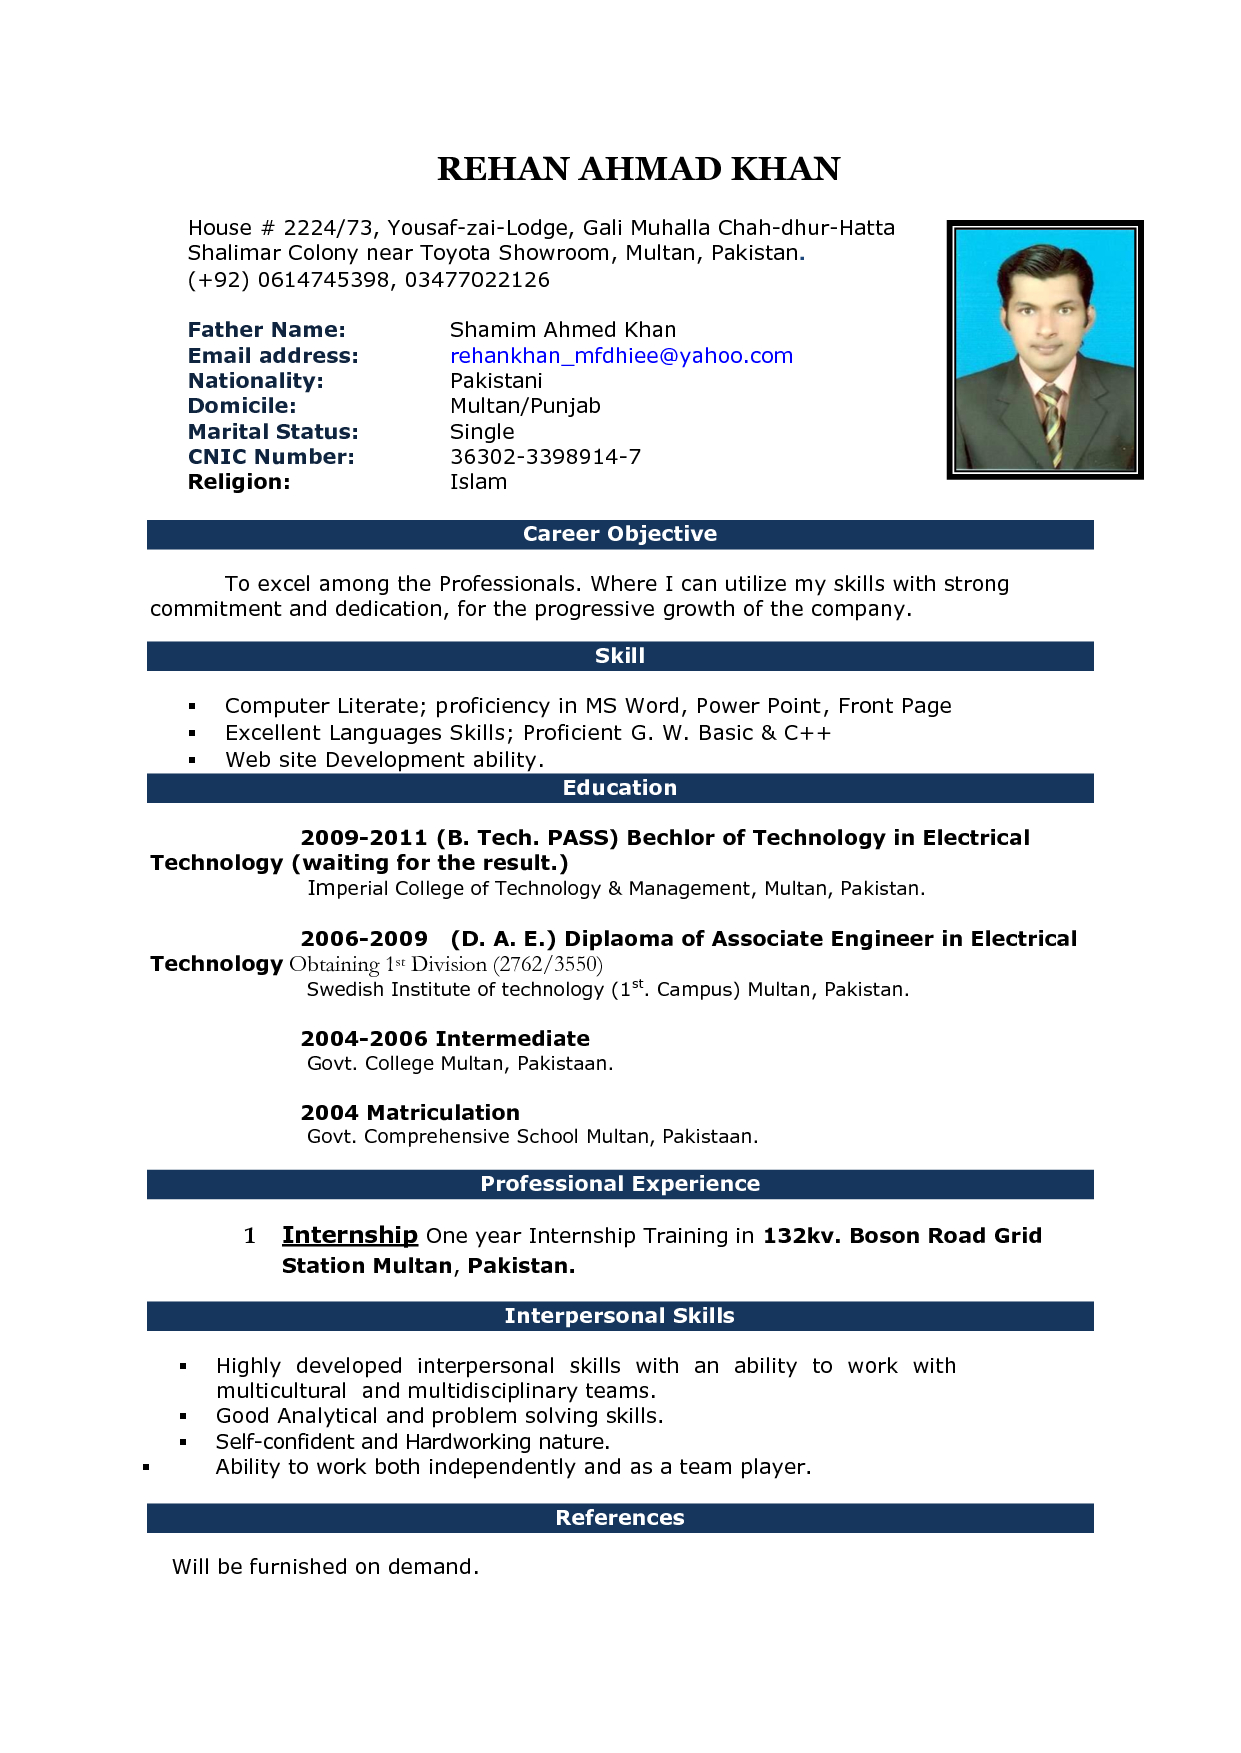 Image Result For Cv Format In Ms Word 2007 Free Download Inside Resume Templates Word 2007